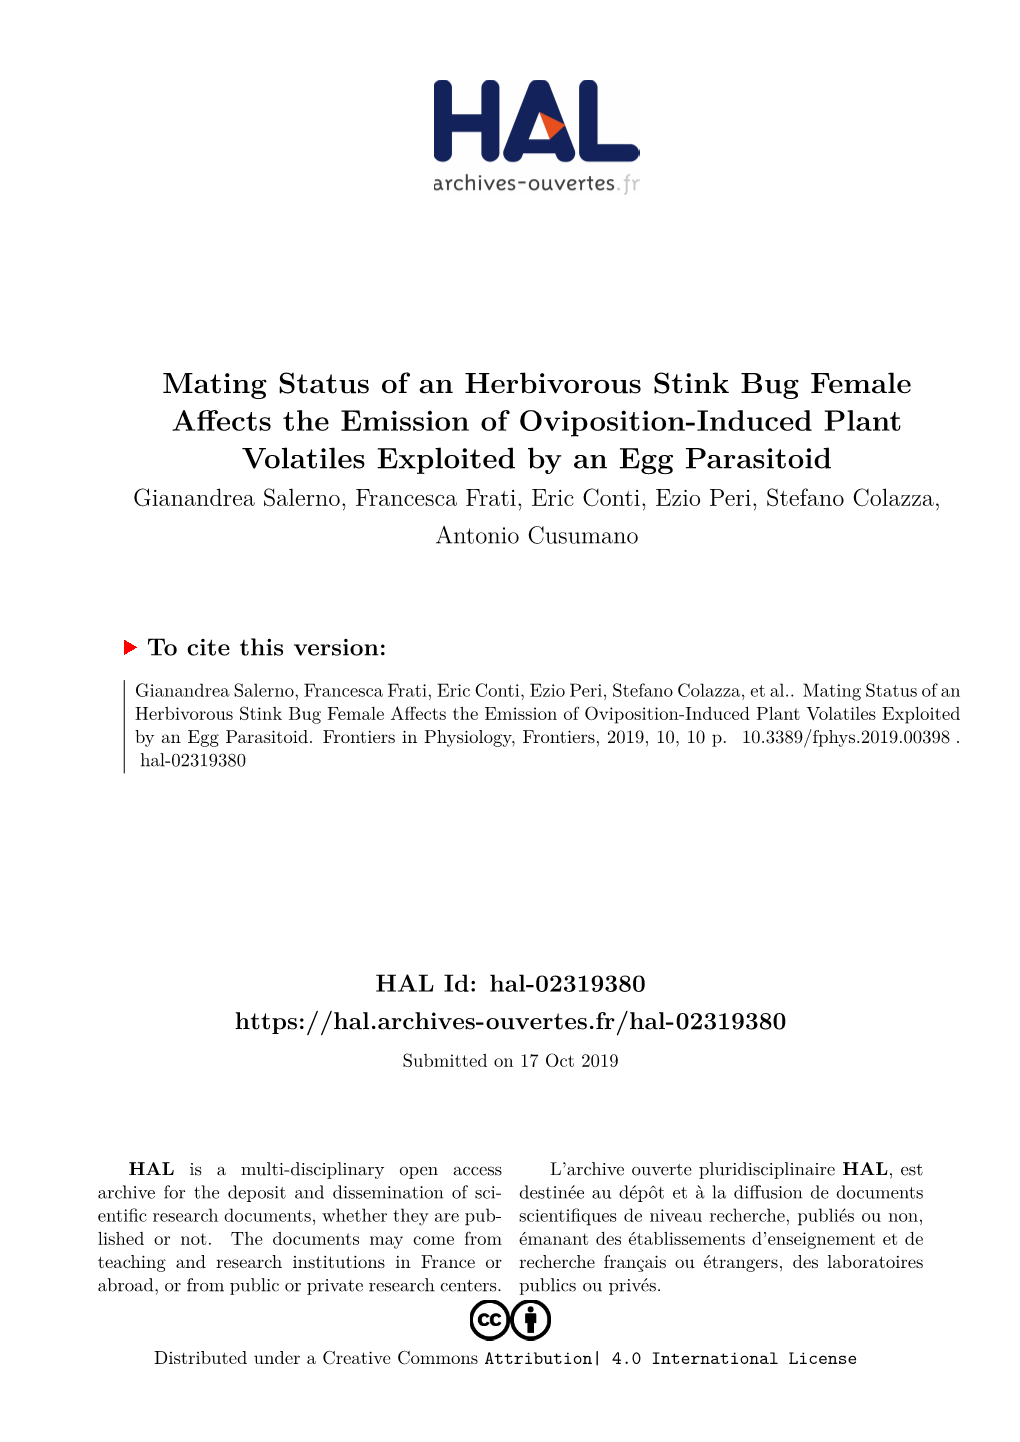 Mating Status of an Herbivorous Stink Bug Female Affects the Emission Of